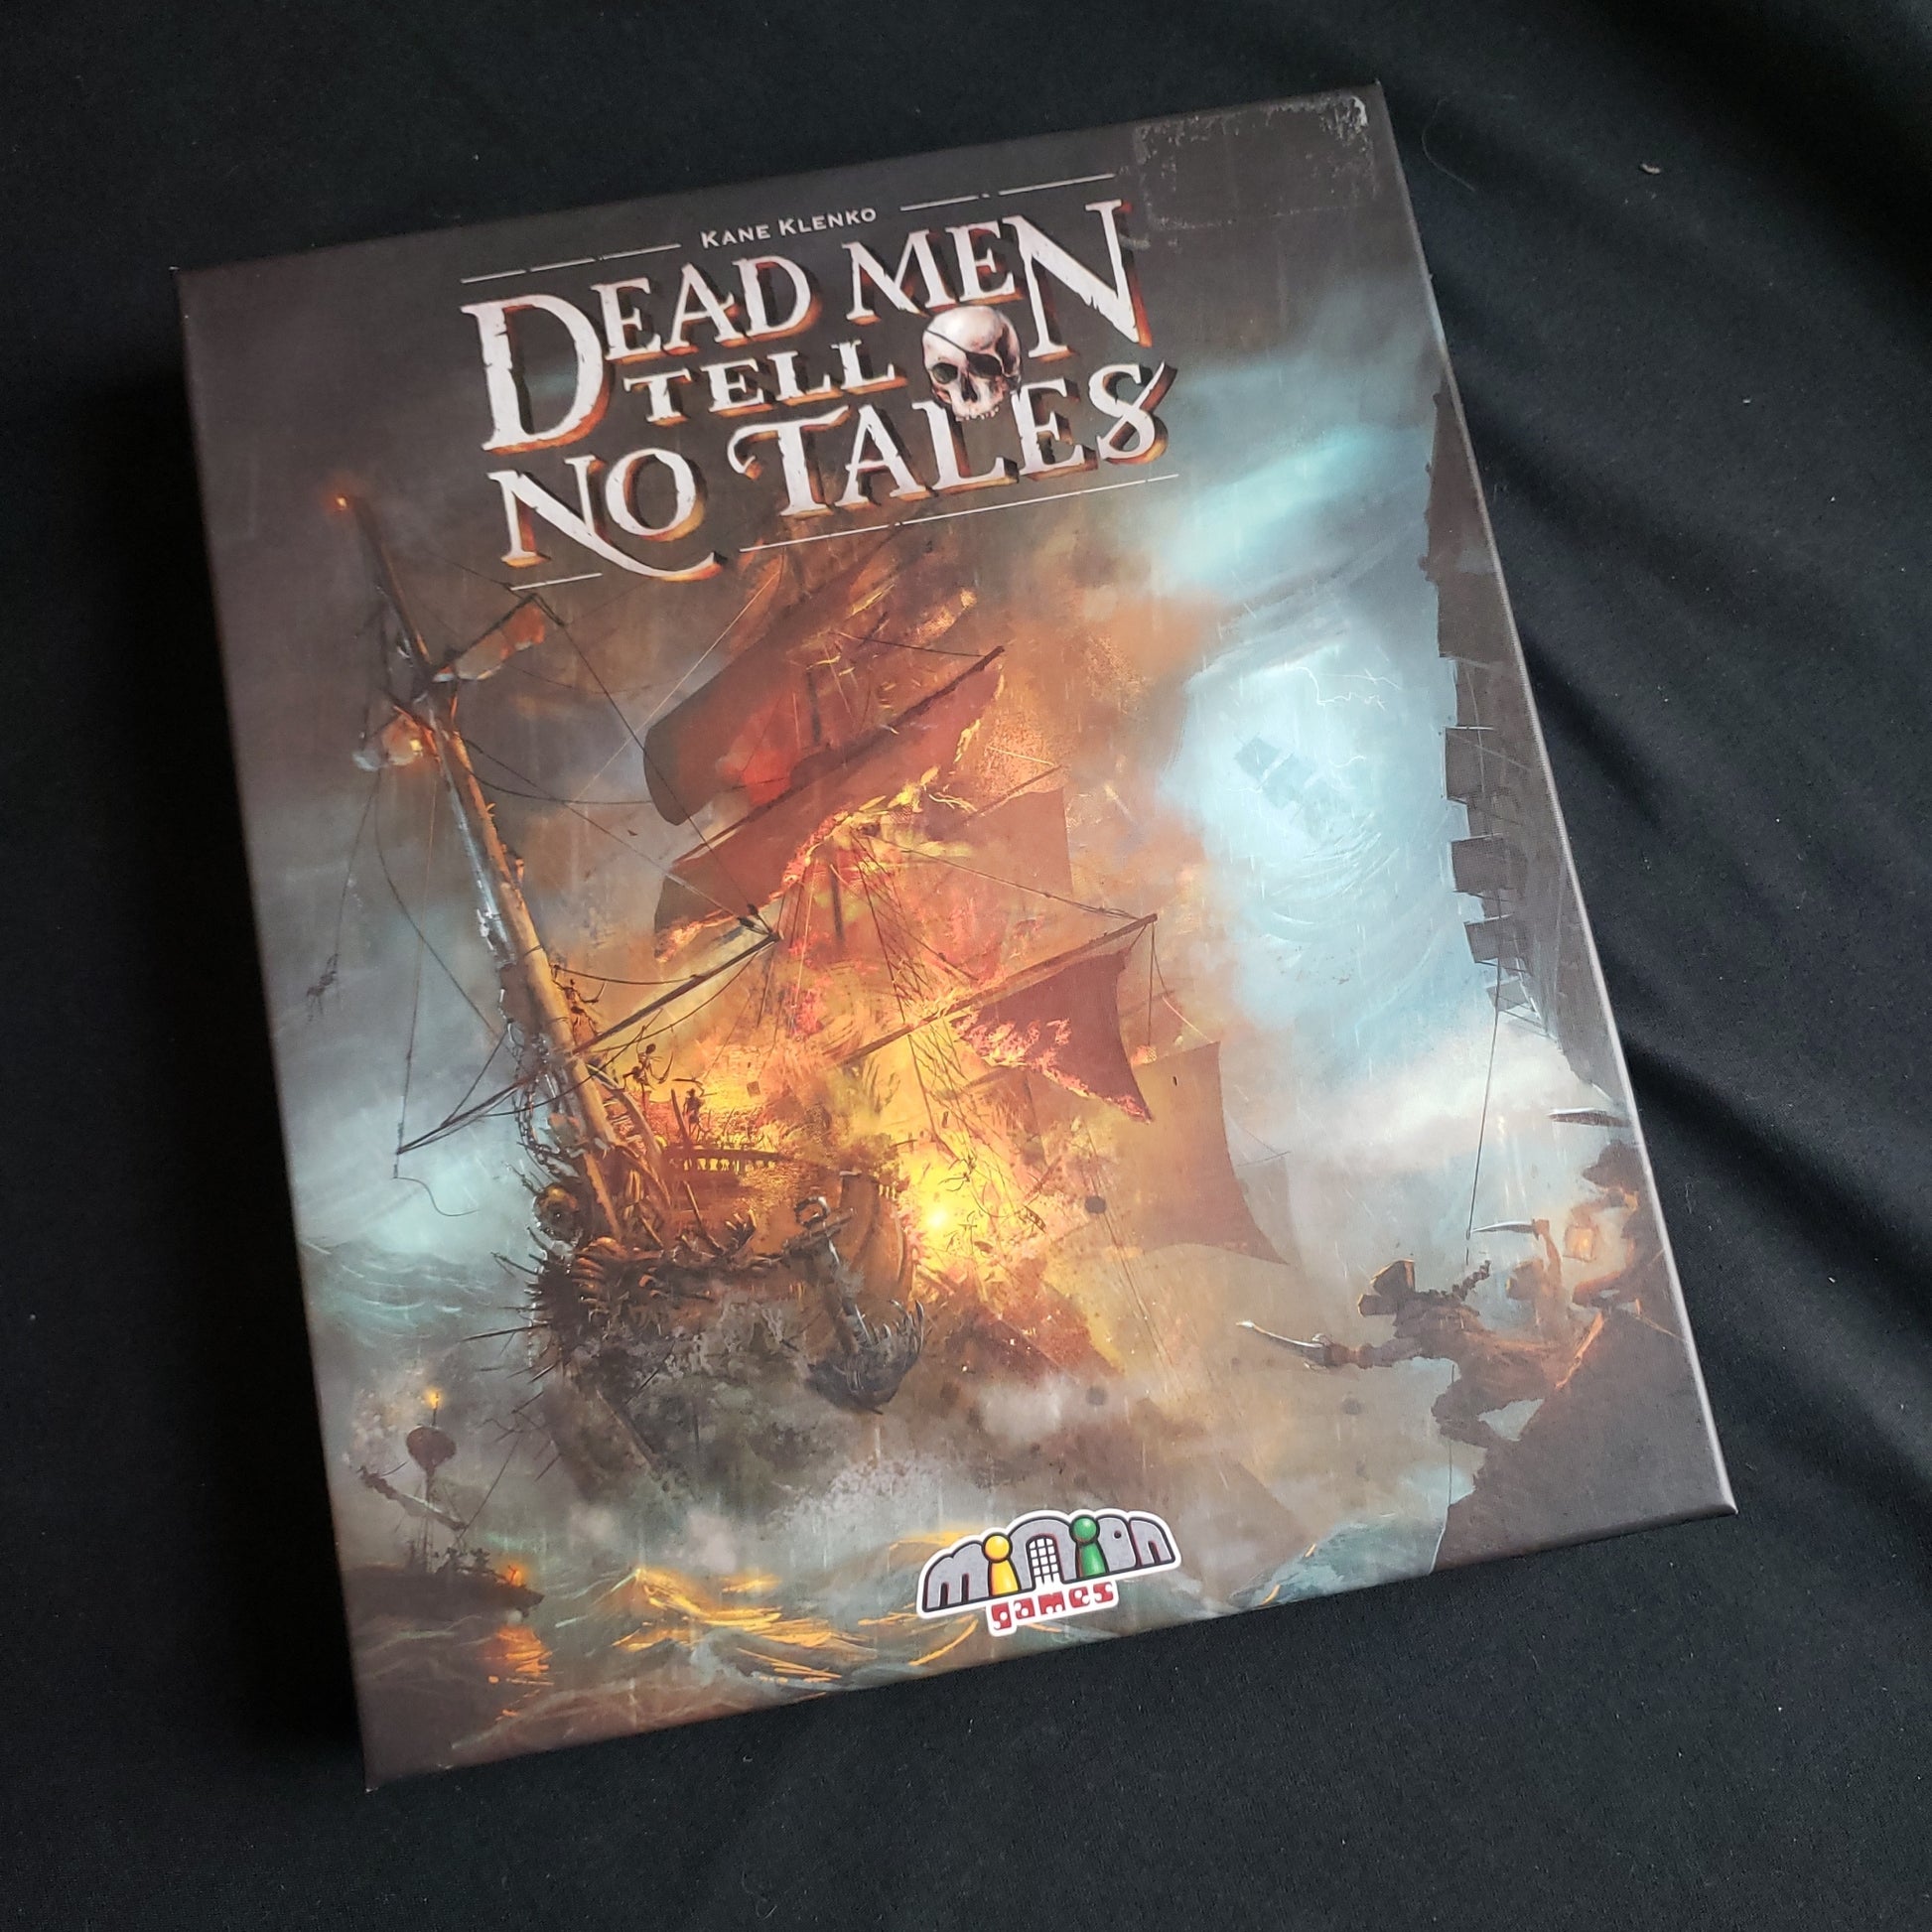 Image shows the front cover of the box of the Dead Men Tell No Tales board game